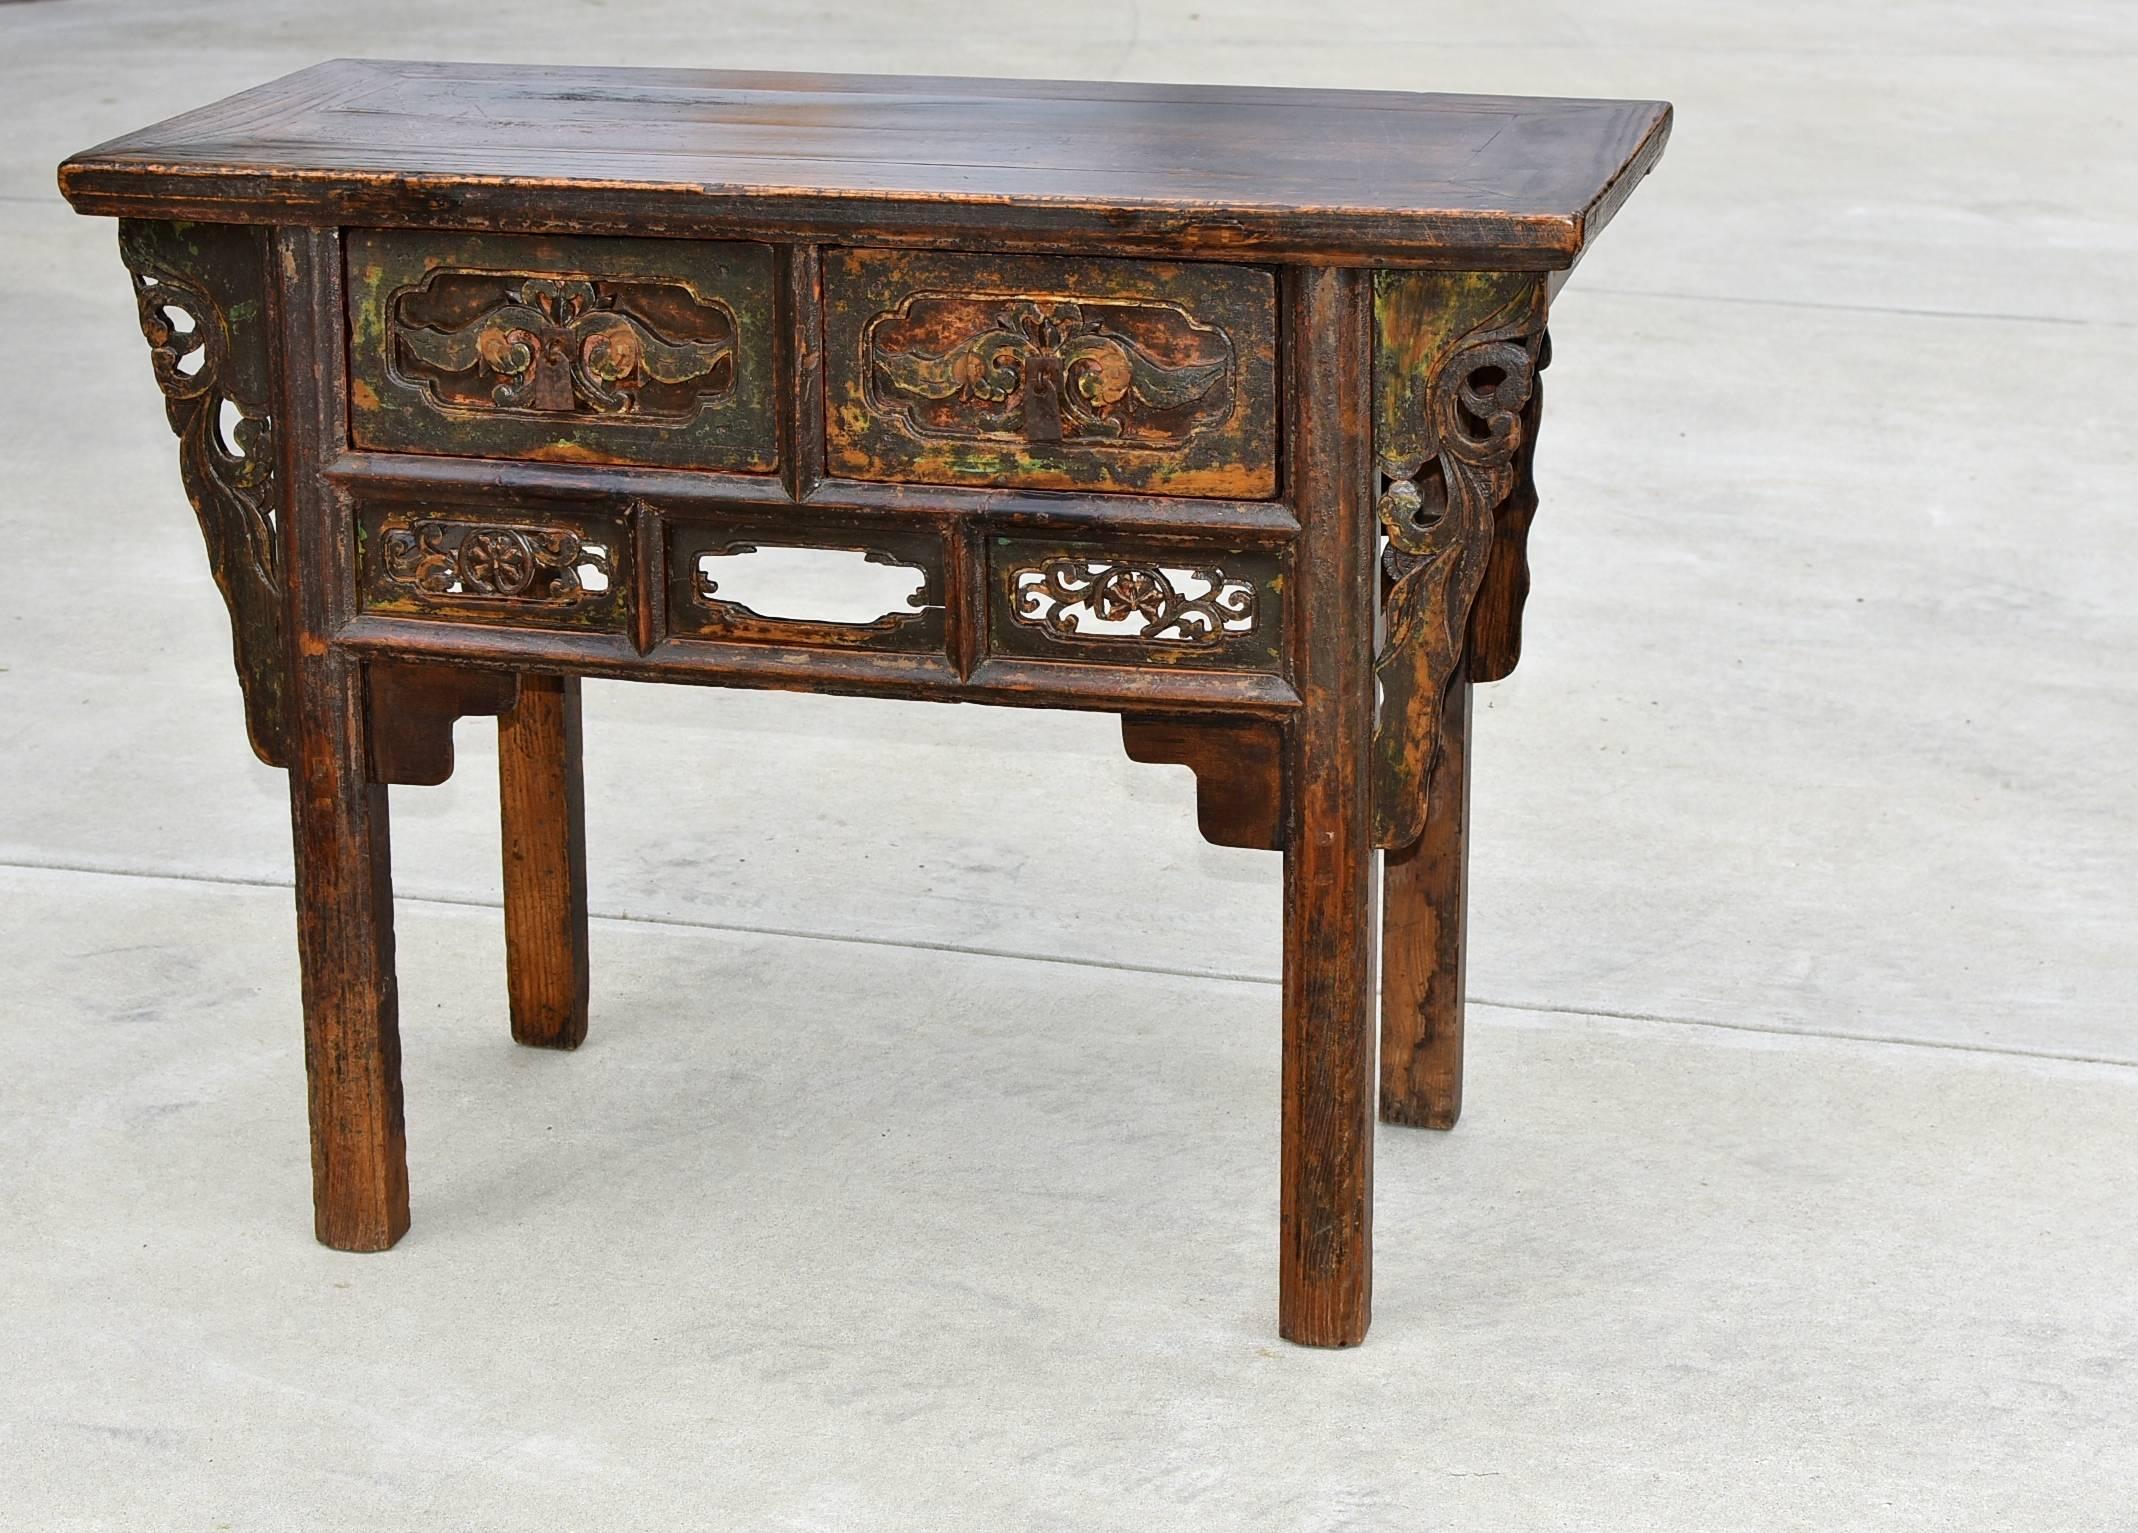 Hand-Carved 19th Century, Carved Table, Chinese Antique Table with Peony